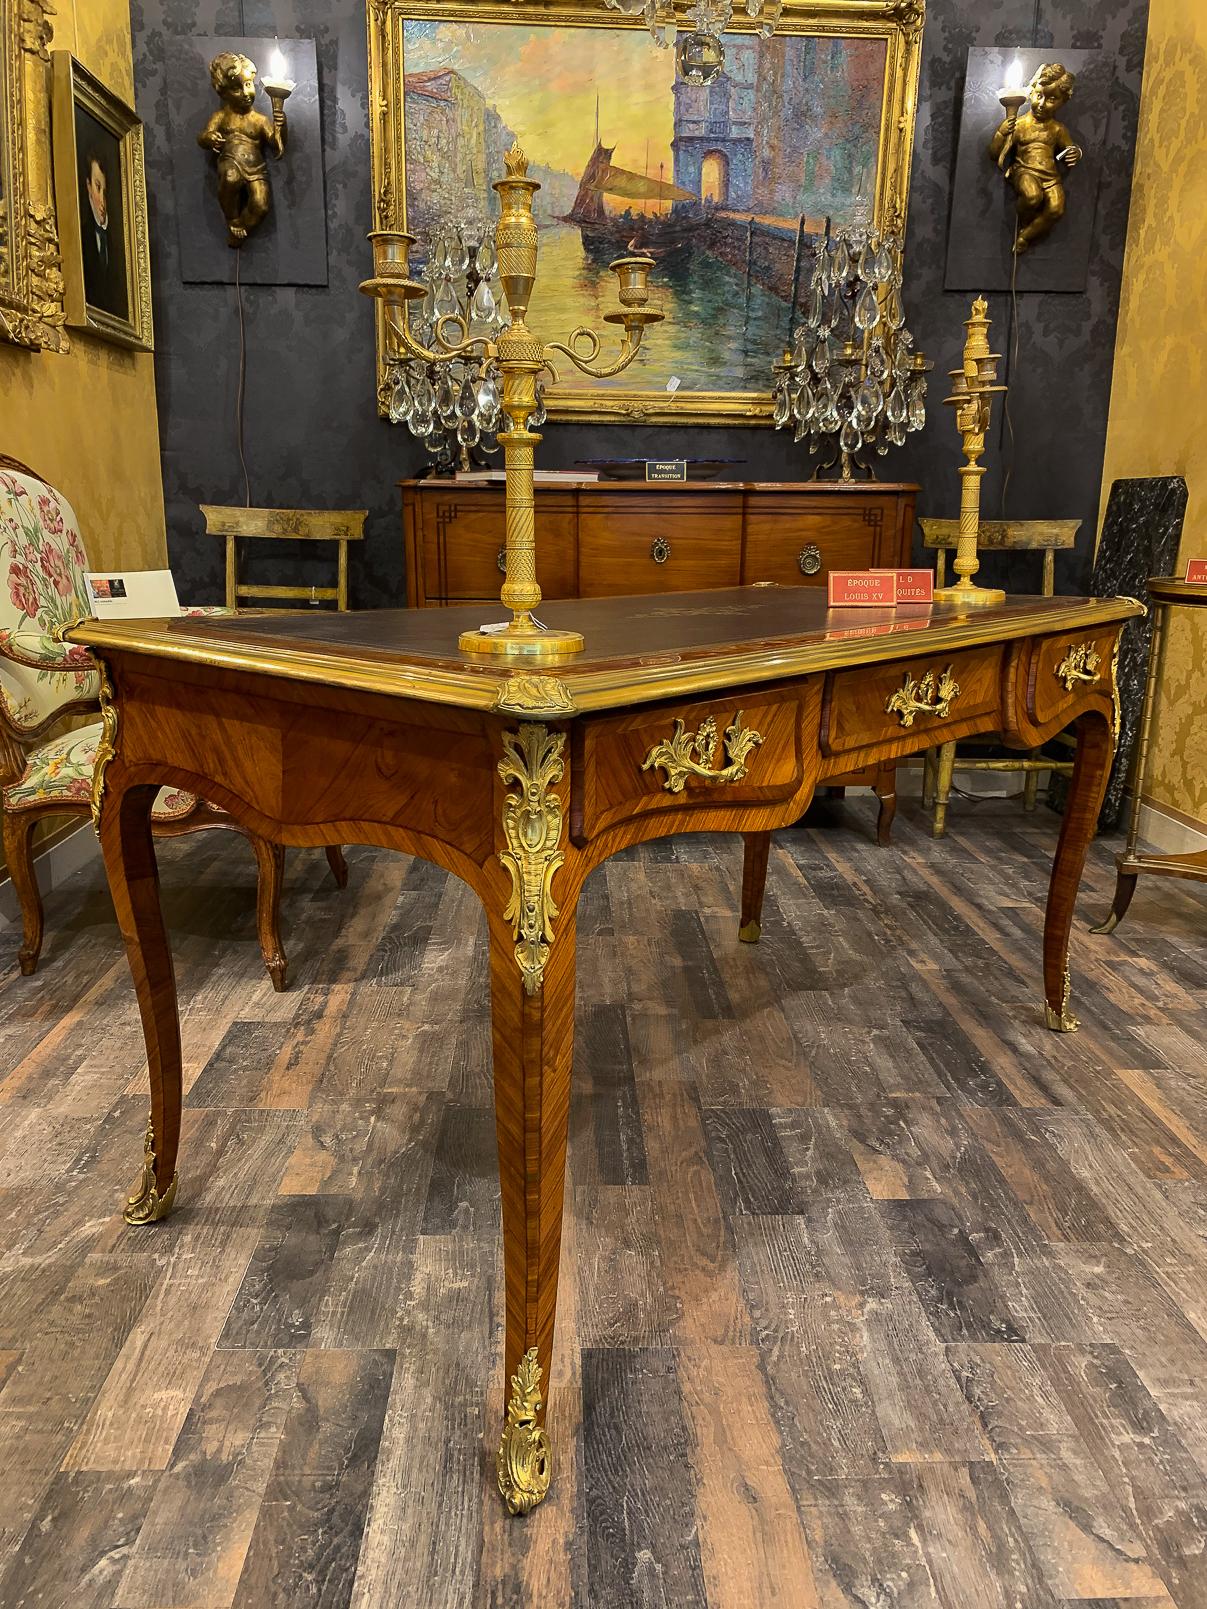 French Louis Period, Flat Violetwood Desk with Gilt-Bronze Decoration circa 1750 (Louis XV.) im Angebot